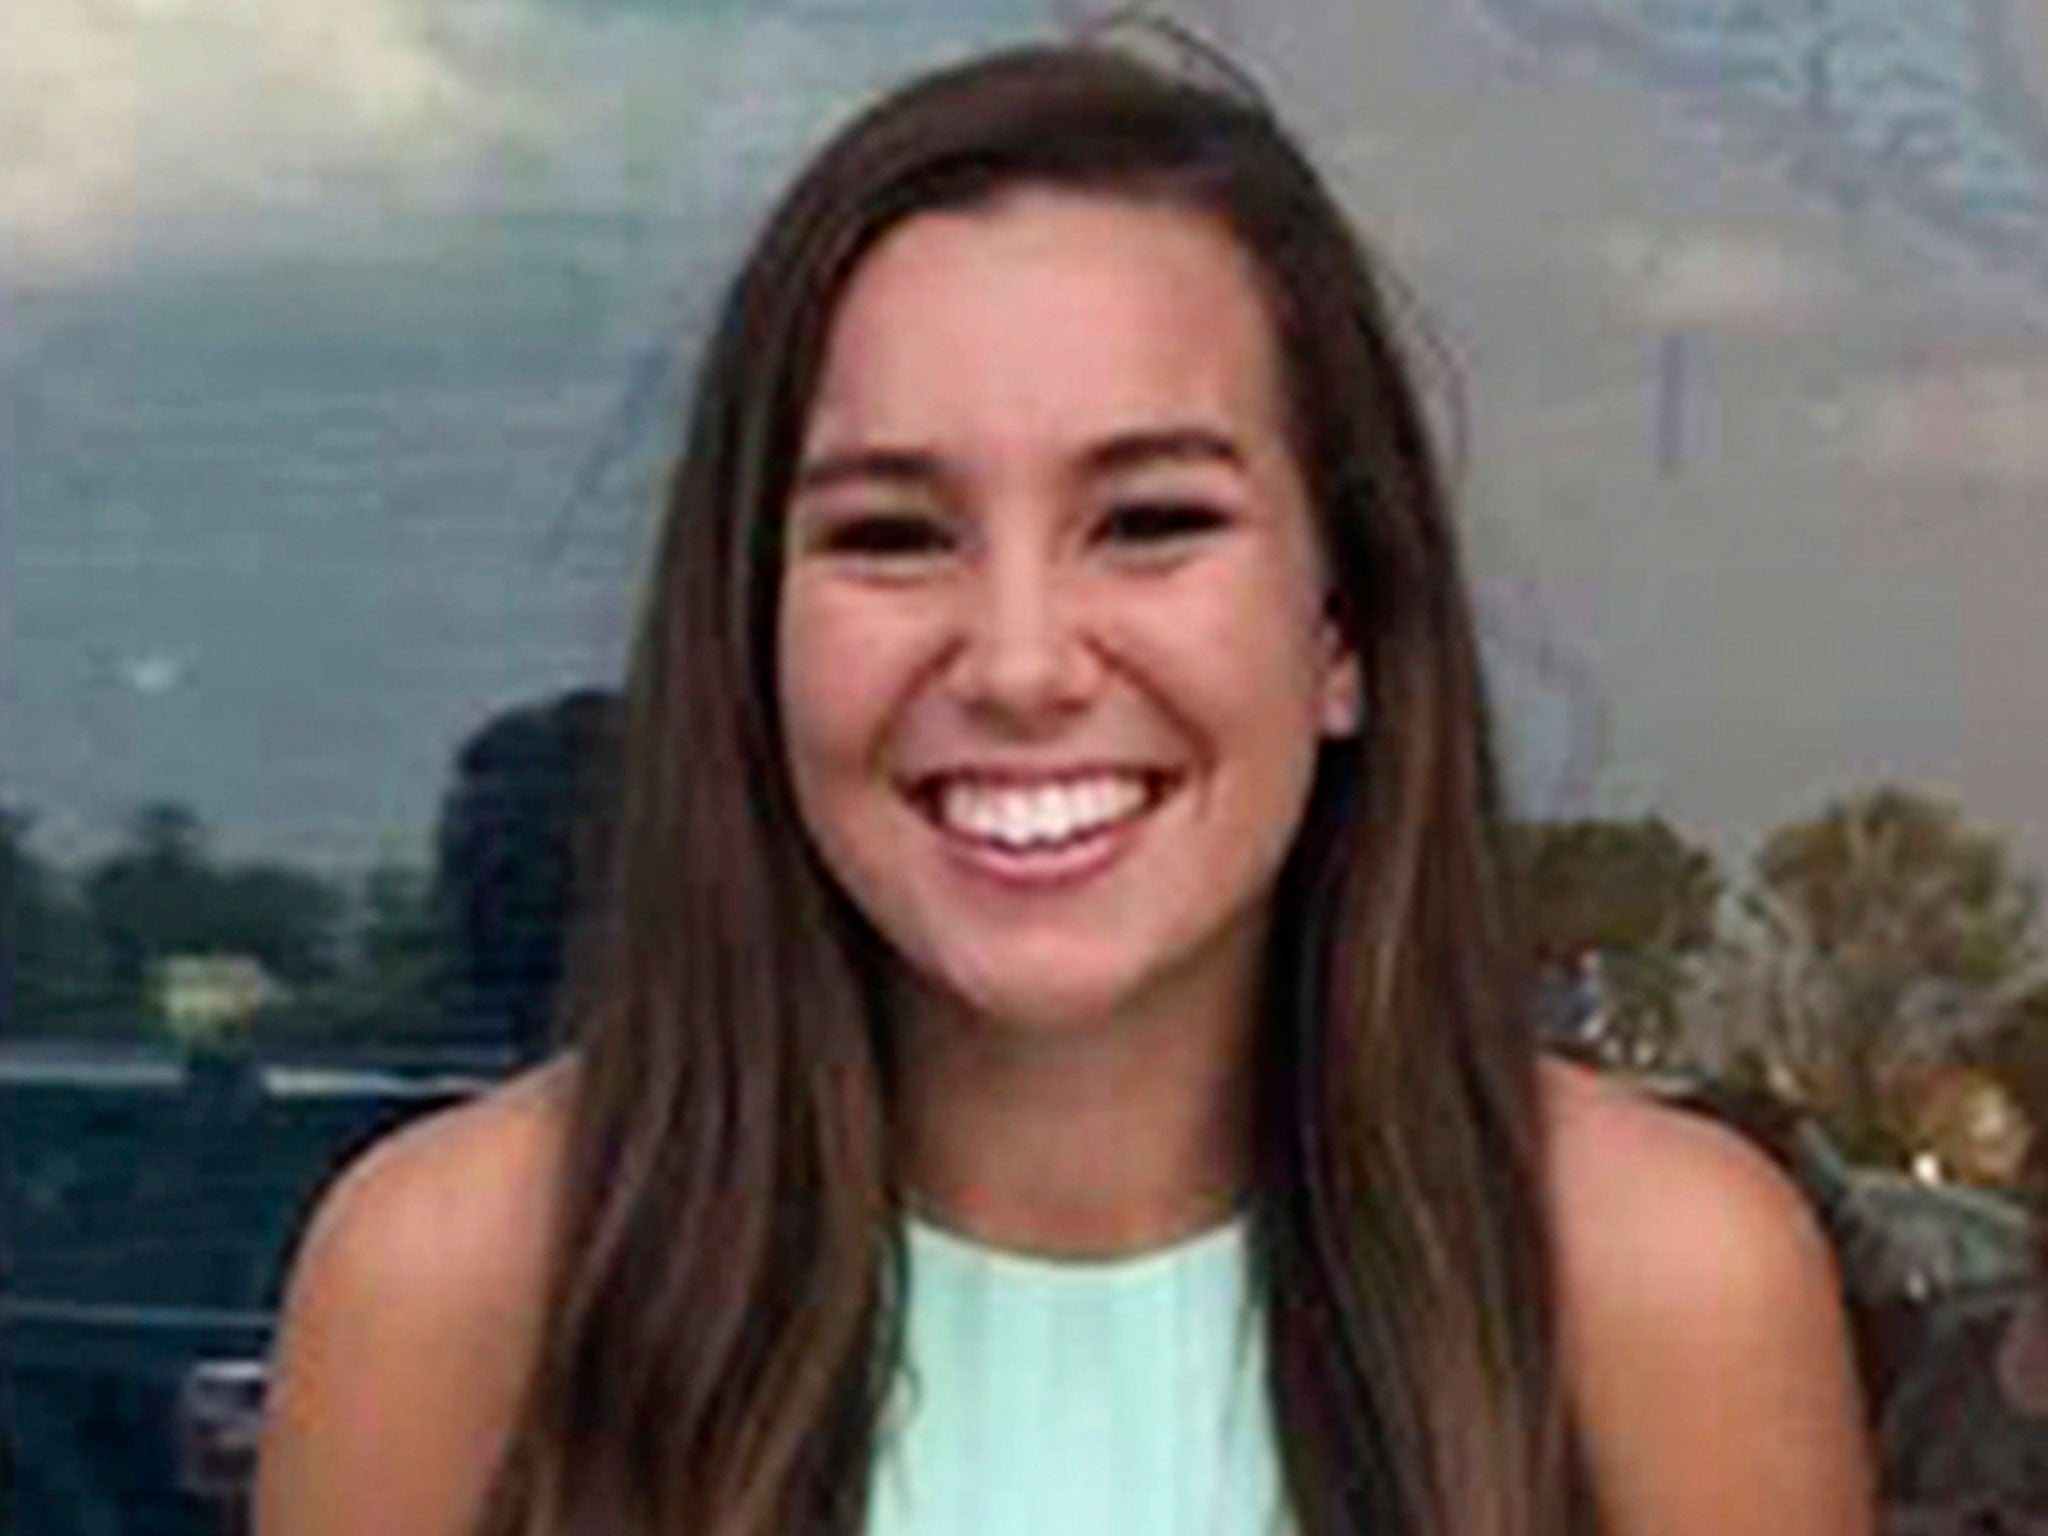 Mollie Tibbetts had been missing since 18 July